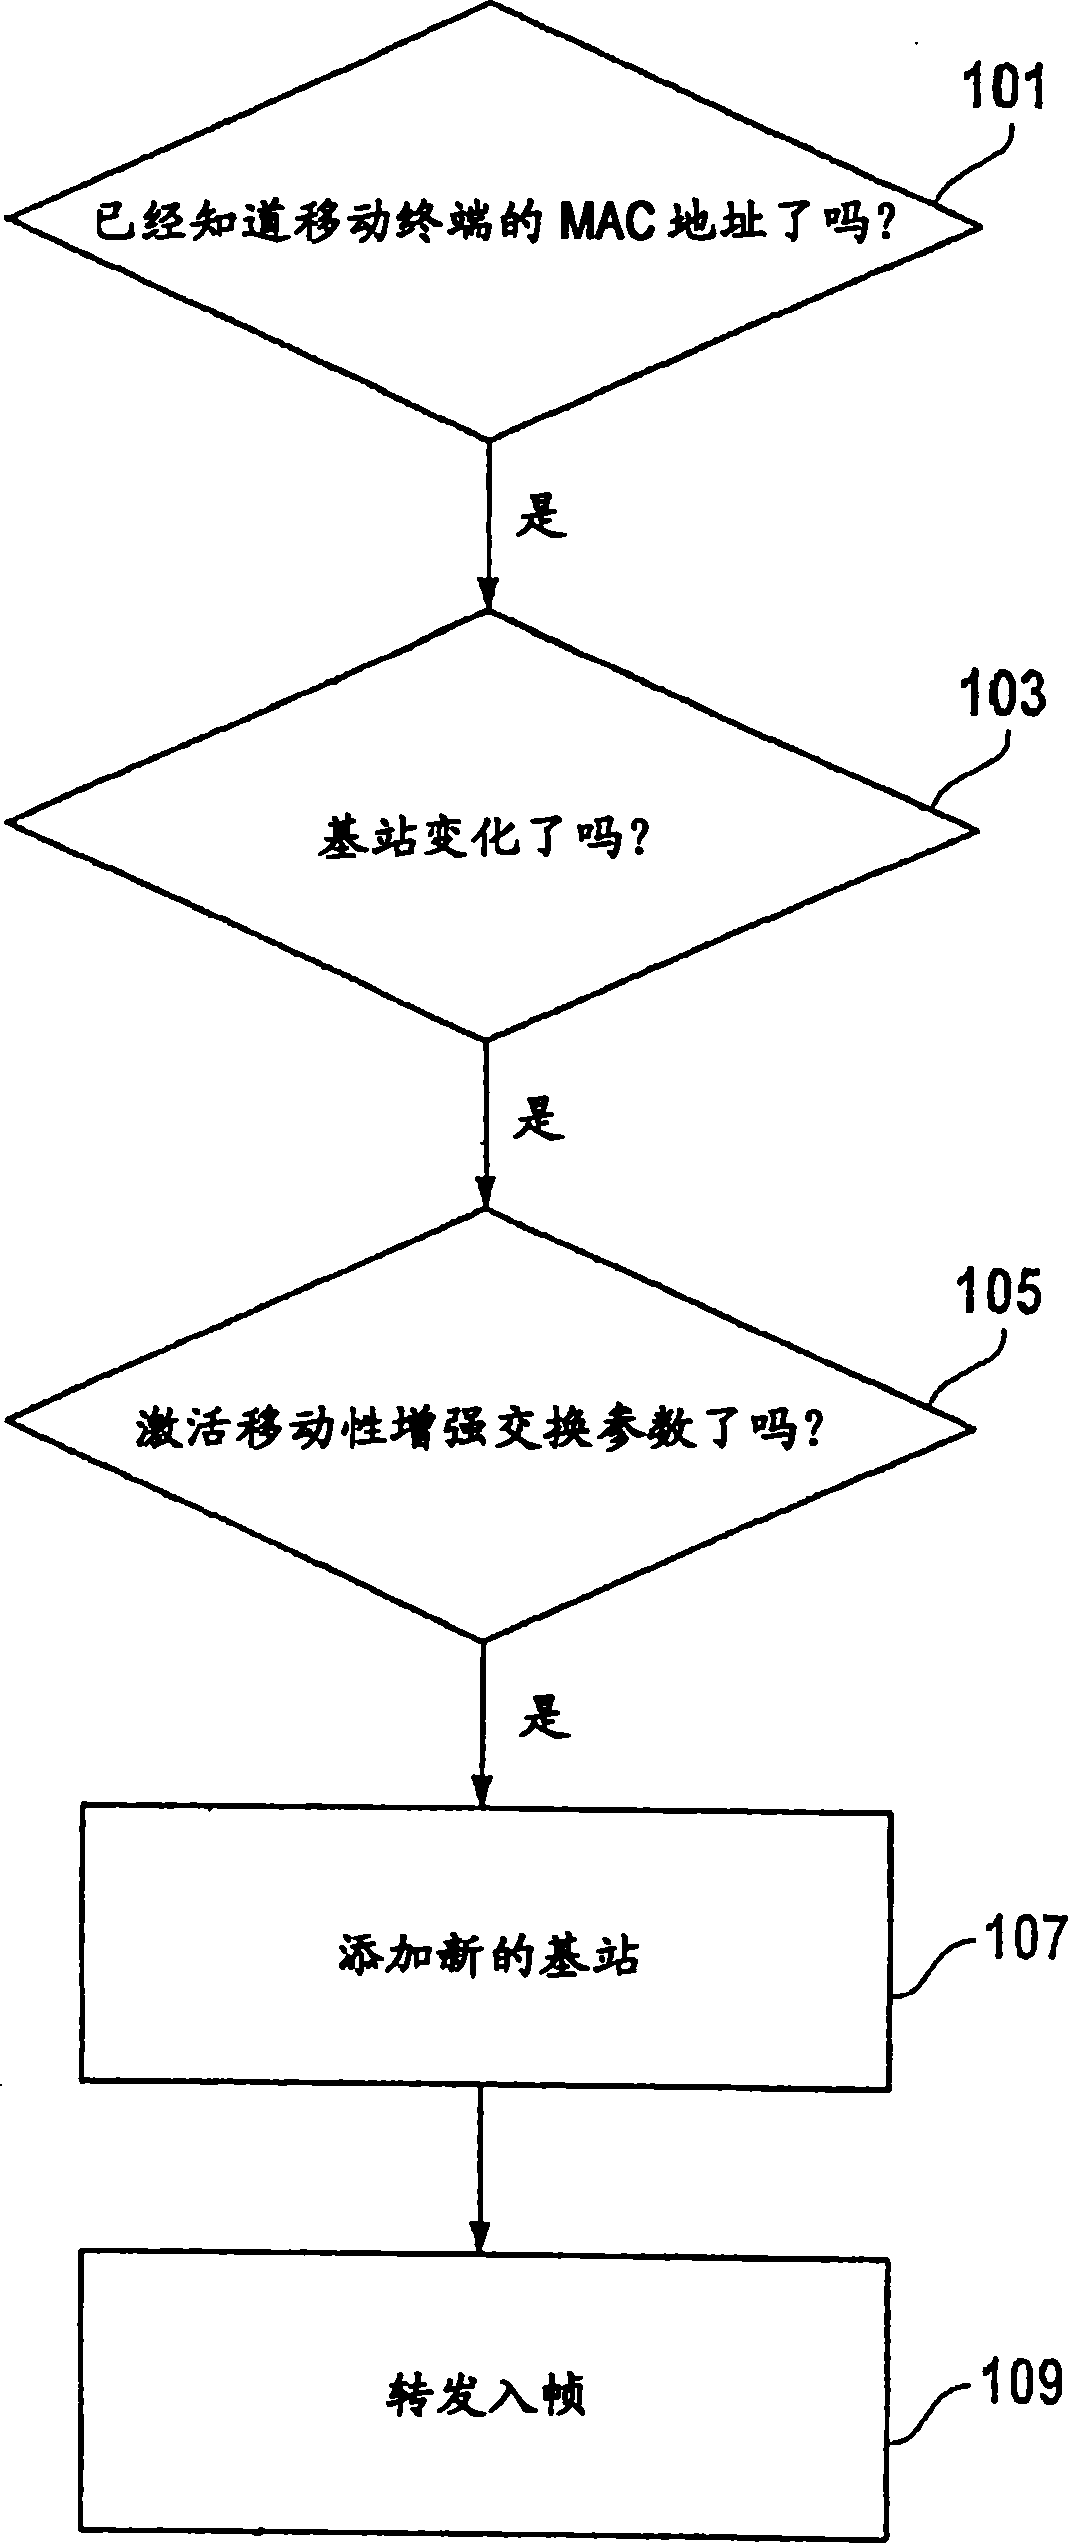 Method for sending downstream traffic from a switching center